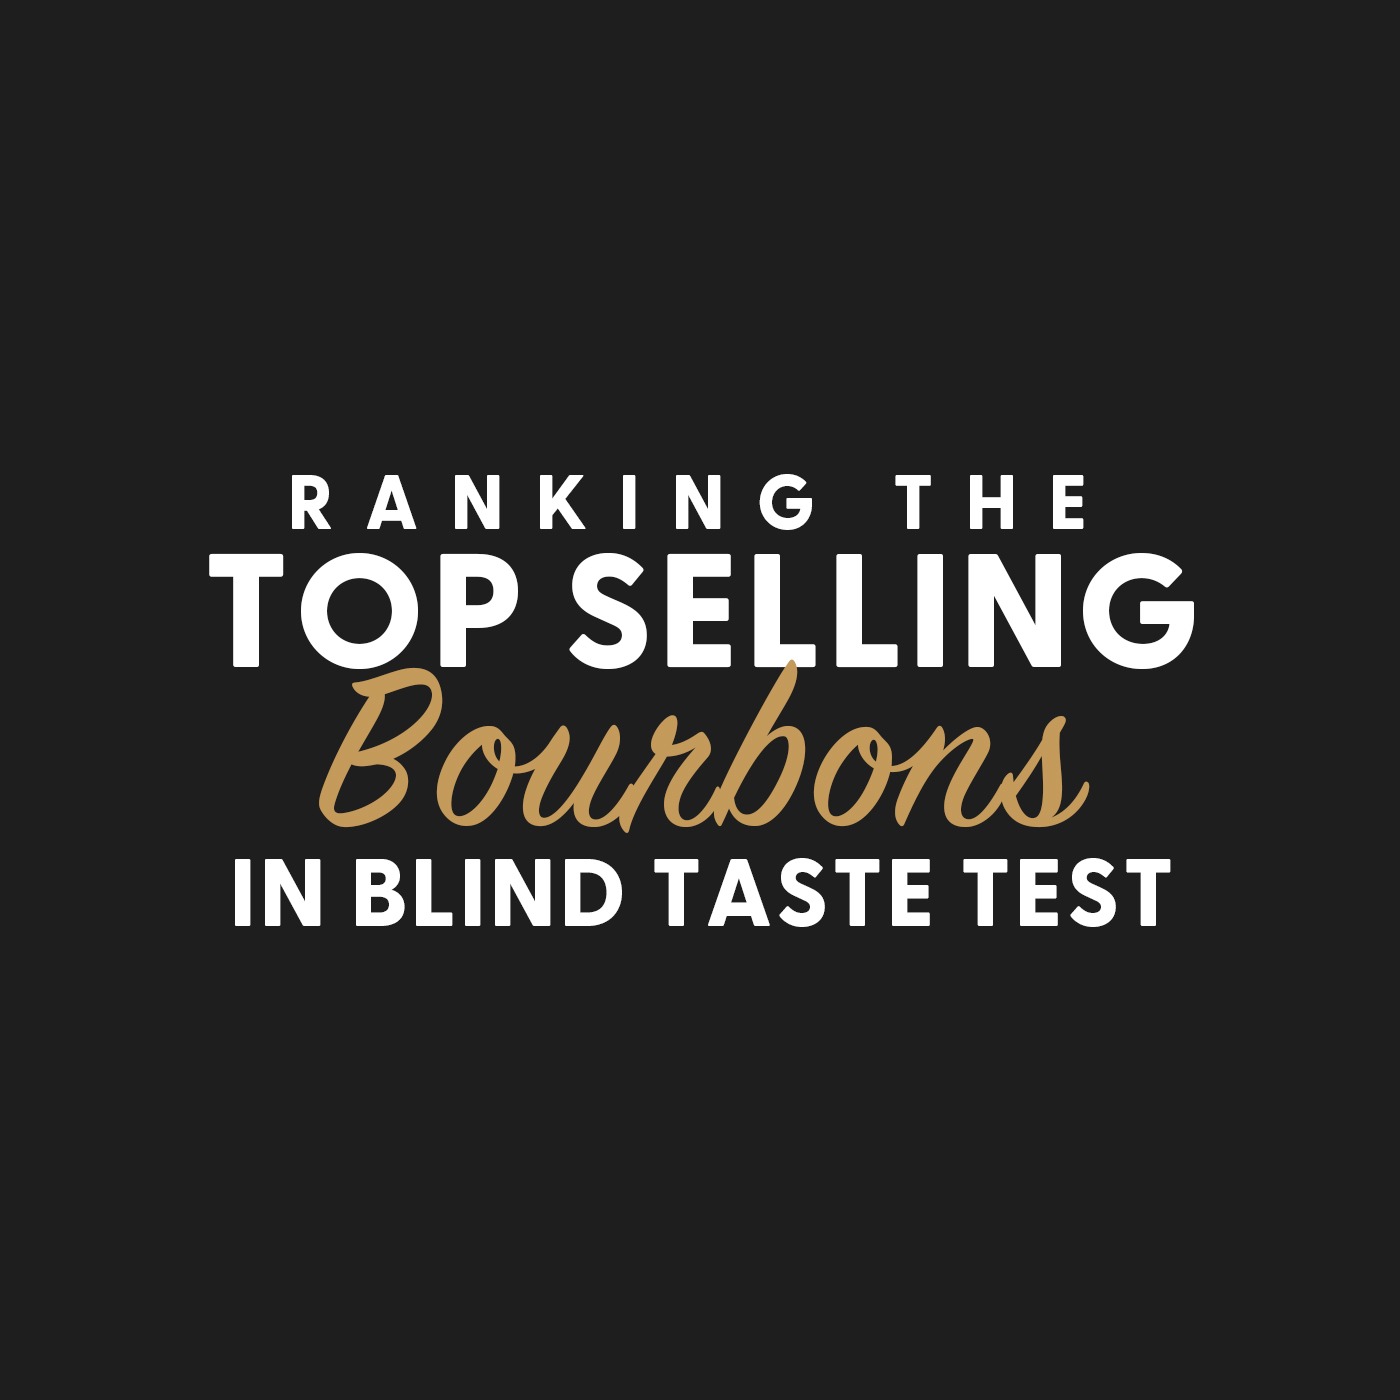 Ranking the TOP SELLING BOURBONS in a Blind Taste Test